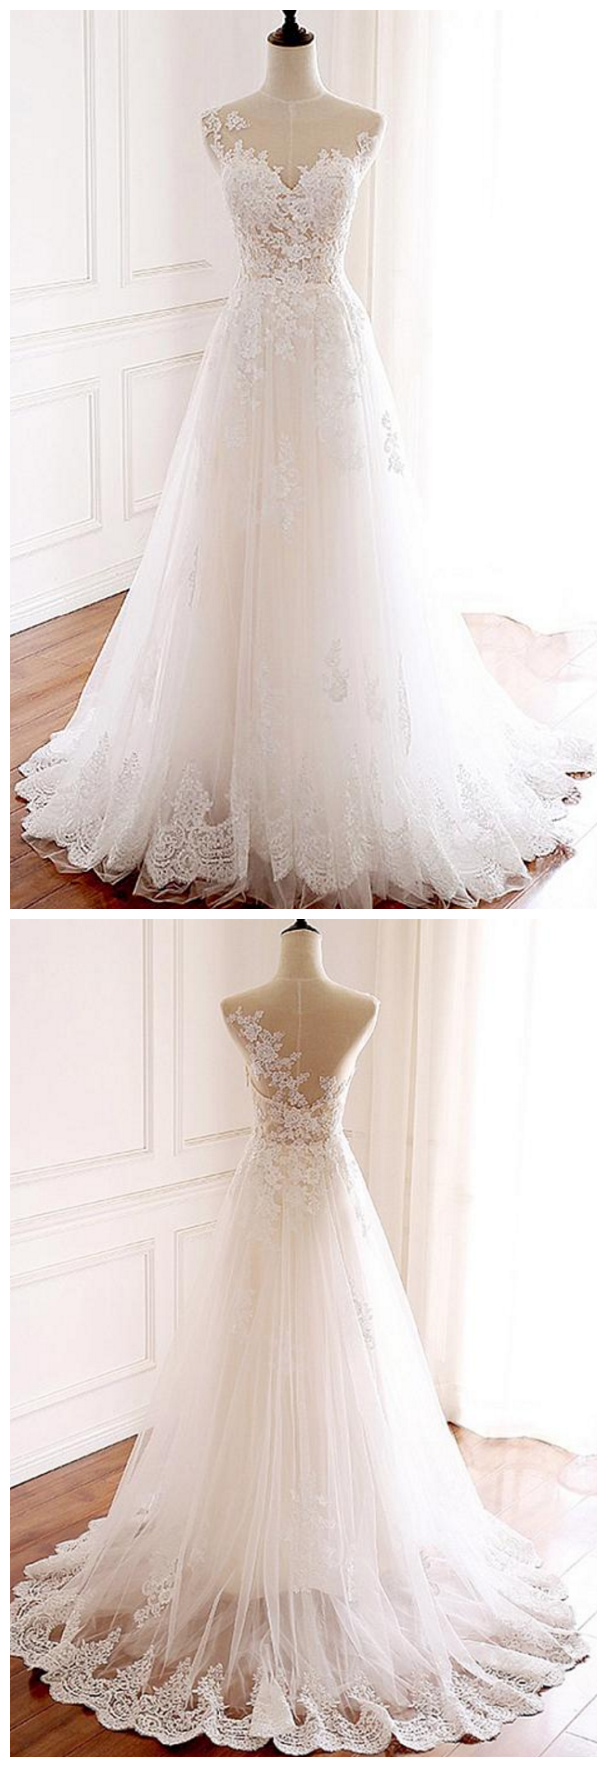 Tulle Jewel Neckline Full-length A-line Wedding With Lace Appliques